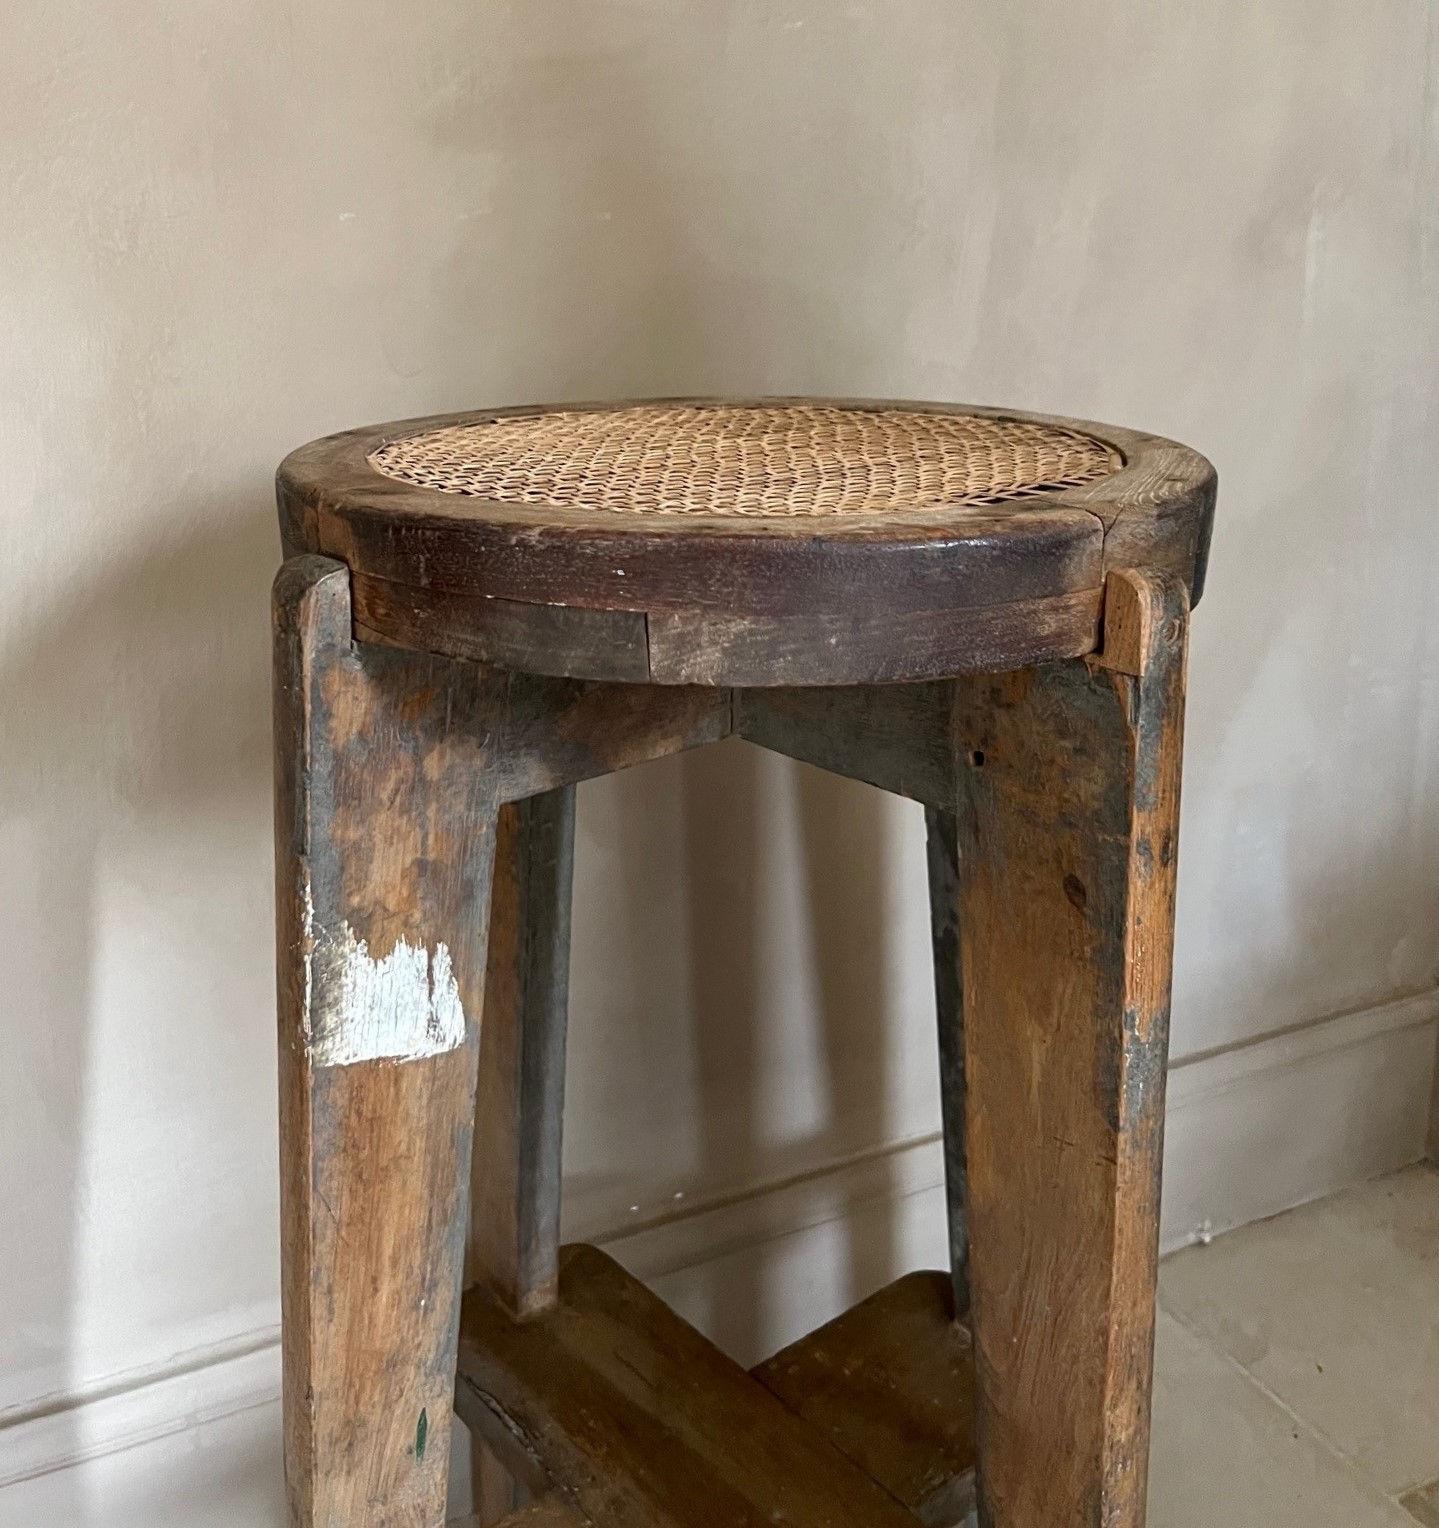 Pierre Jeanneret Chandigarh high stool with canework PJ-011001 In Good Condition For Sale In Vosselaar, BE